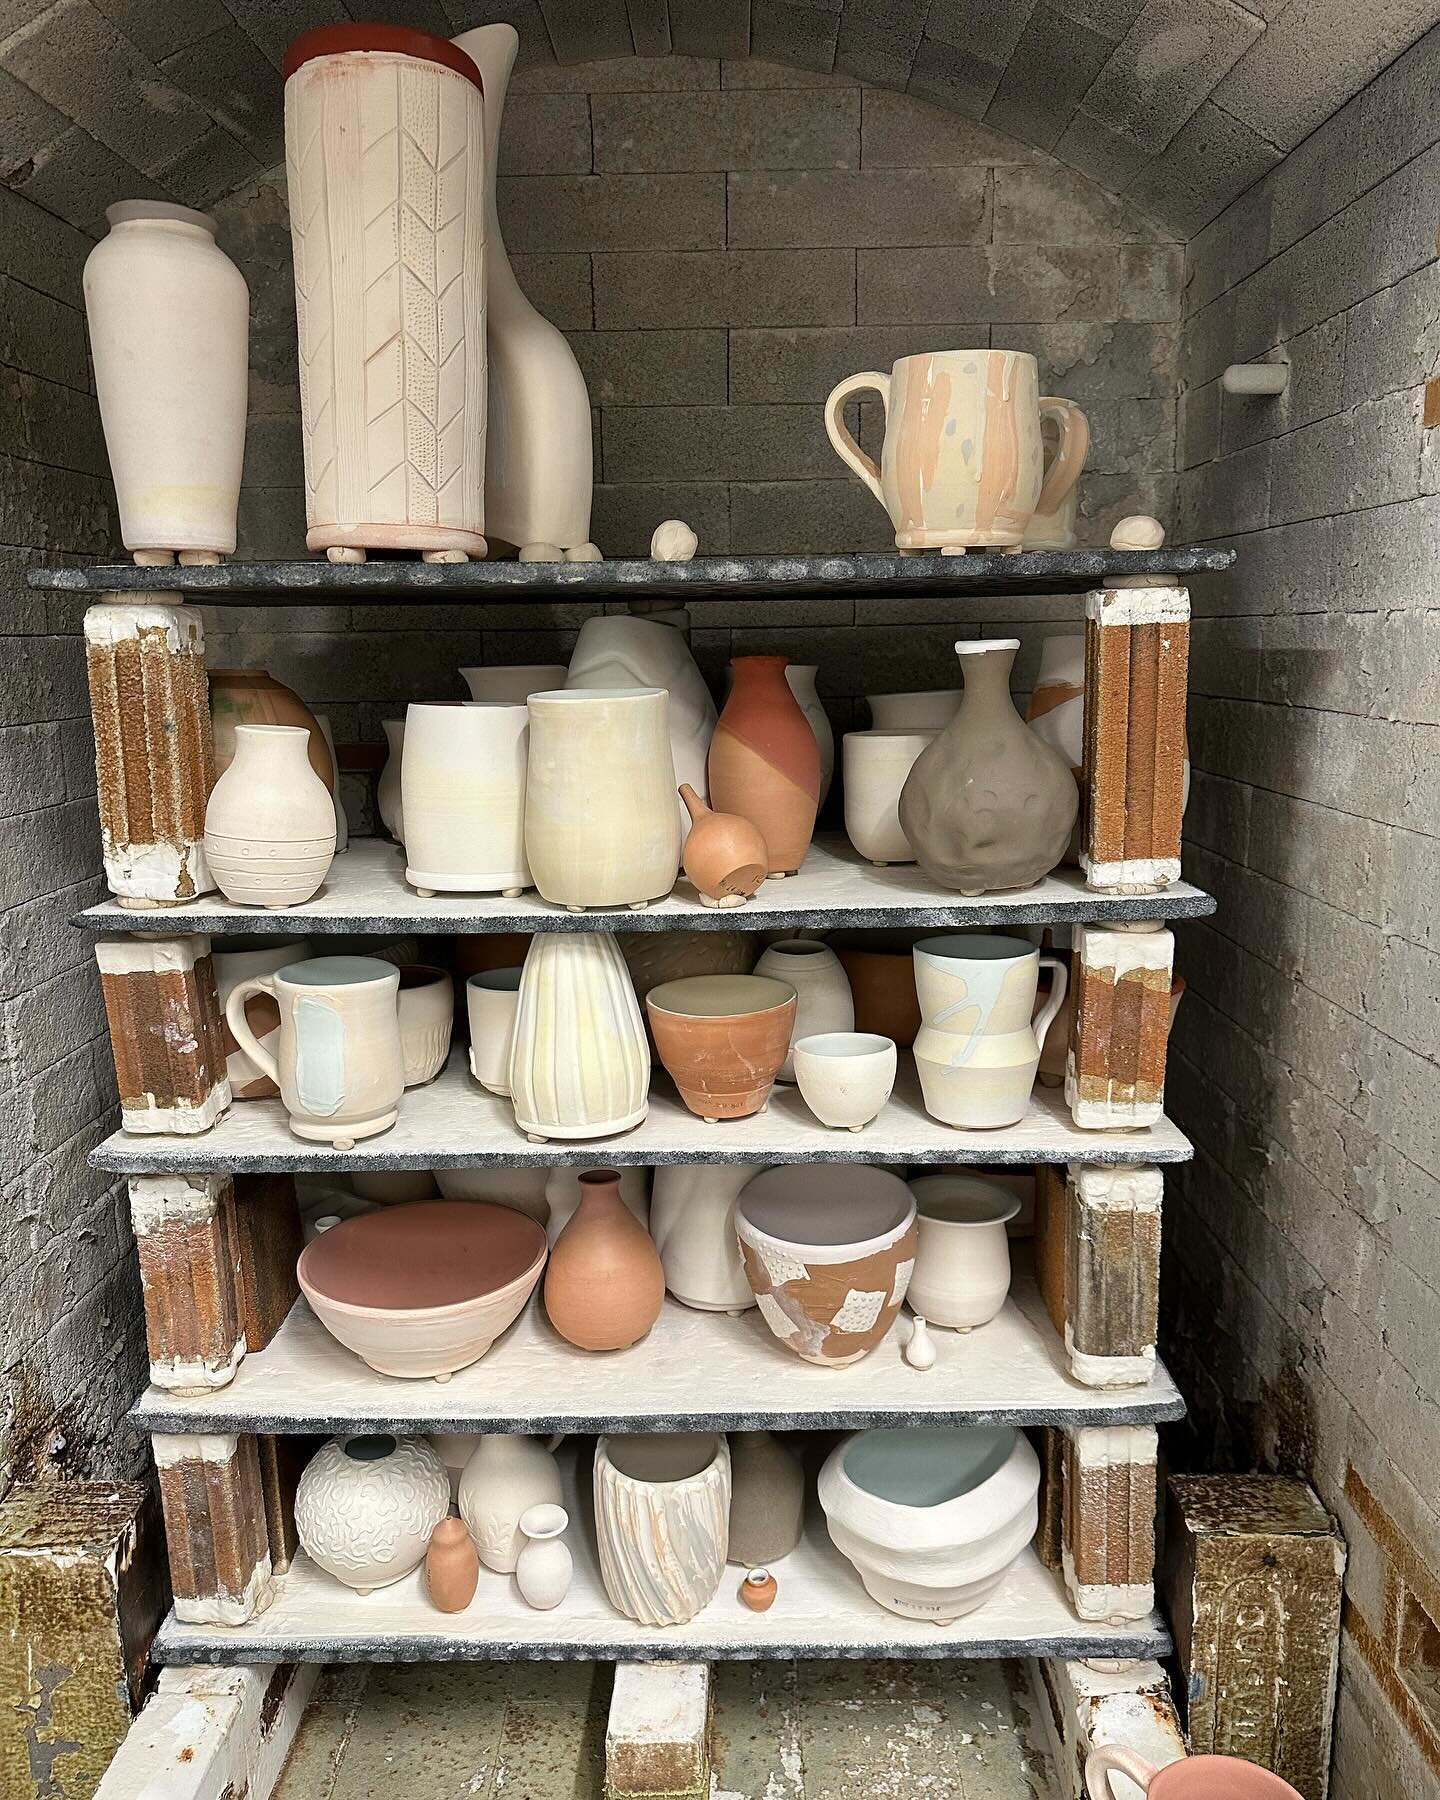 Super day with my Clay school peeps @theumbrellaarts in Concord with Zac @zachary_mickelson_ceramics to glaze and load a Soda Firing that will get started on Wednesday!! 

#theclayschool #concordumbrella #ceramicstudio #potterylife #sodafiredpottery 